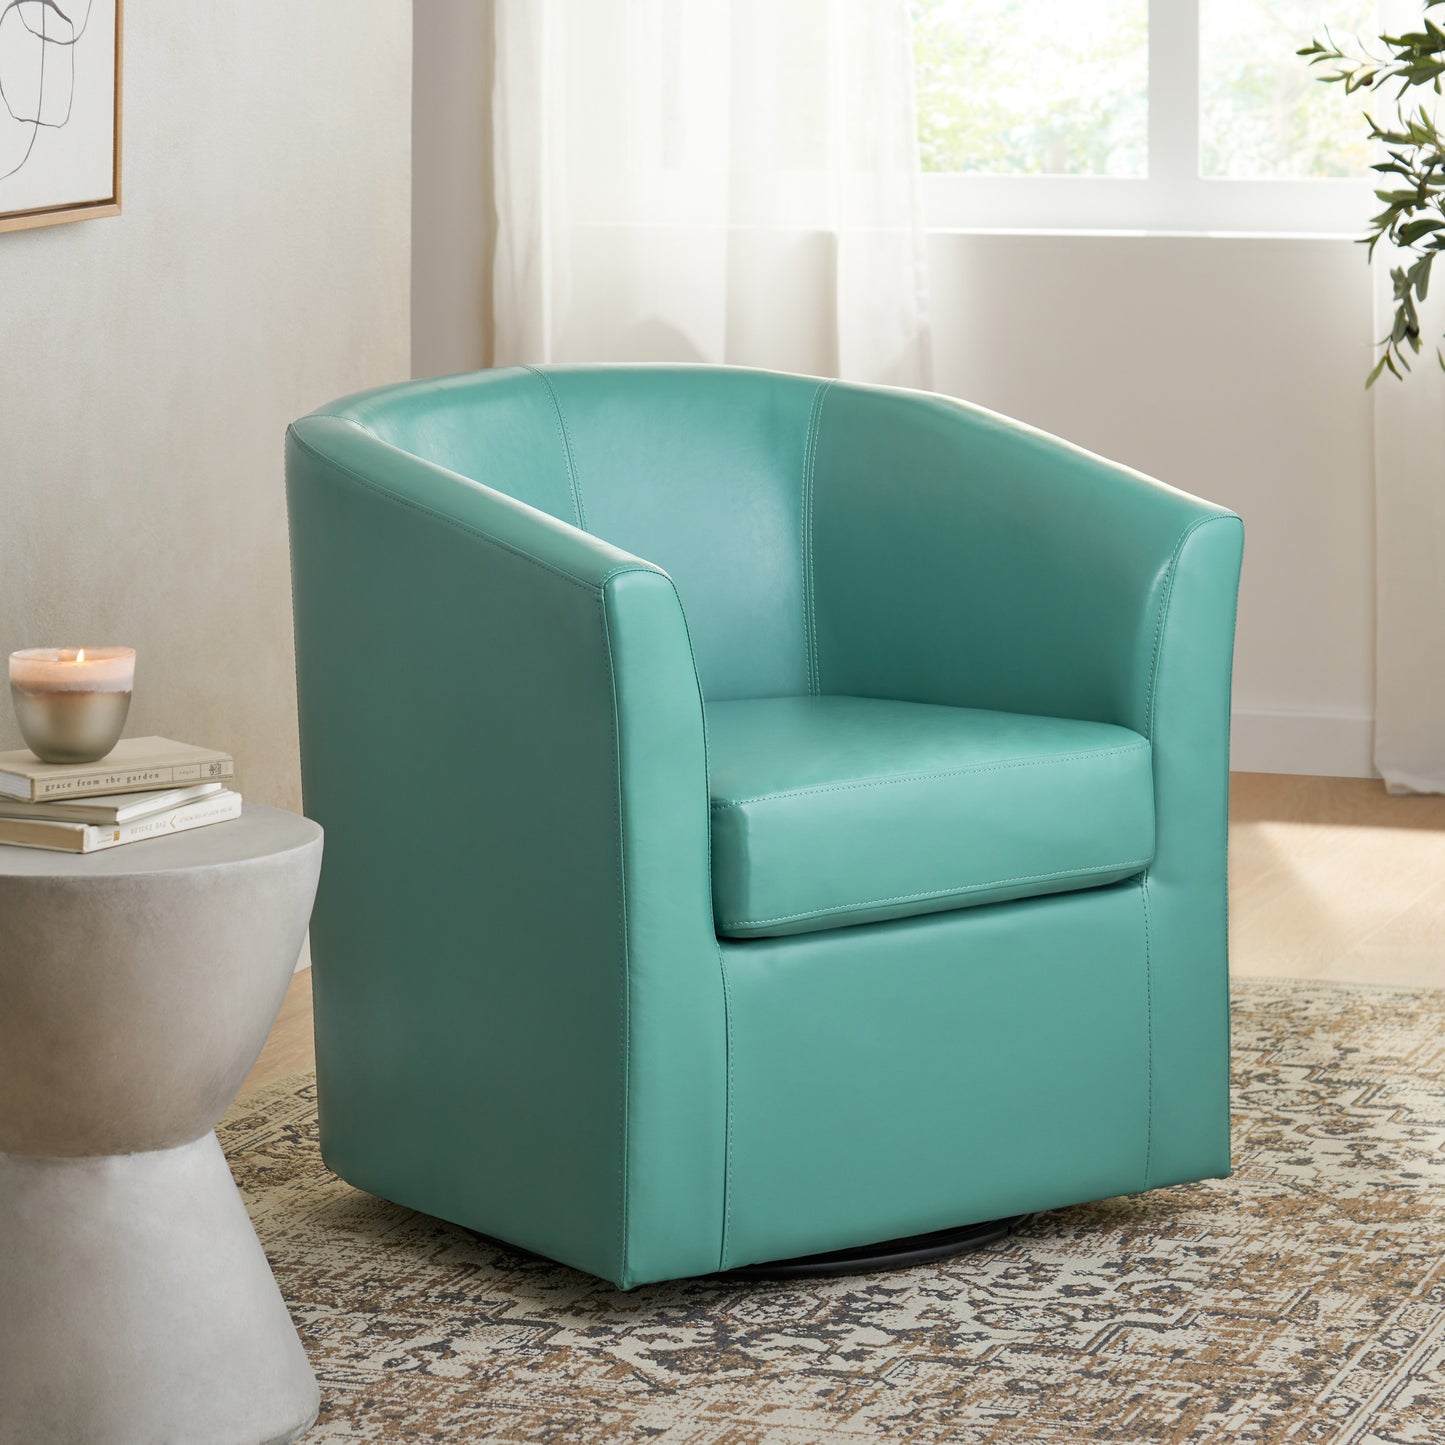 Corley Modern Upholstered Faux Leather Swivel Barrel Club Chair